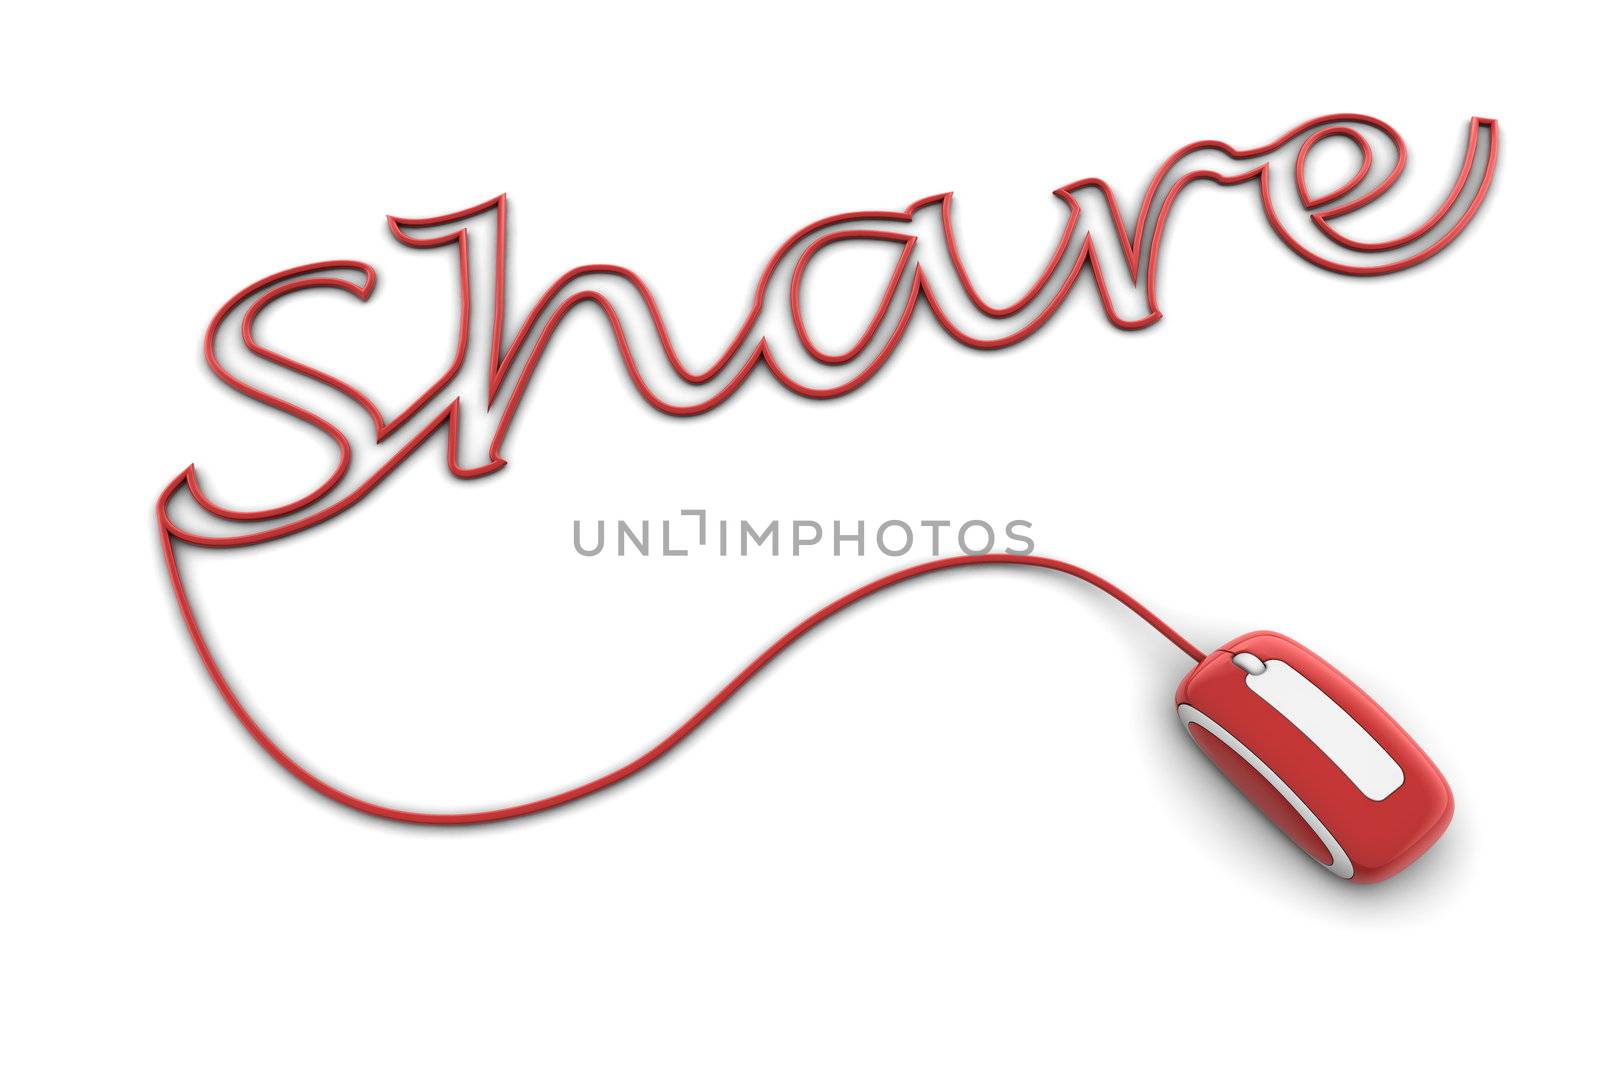 modern glossy red computer mouse is connected to the shiny red word Share - letters are formed by the mouse cable